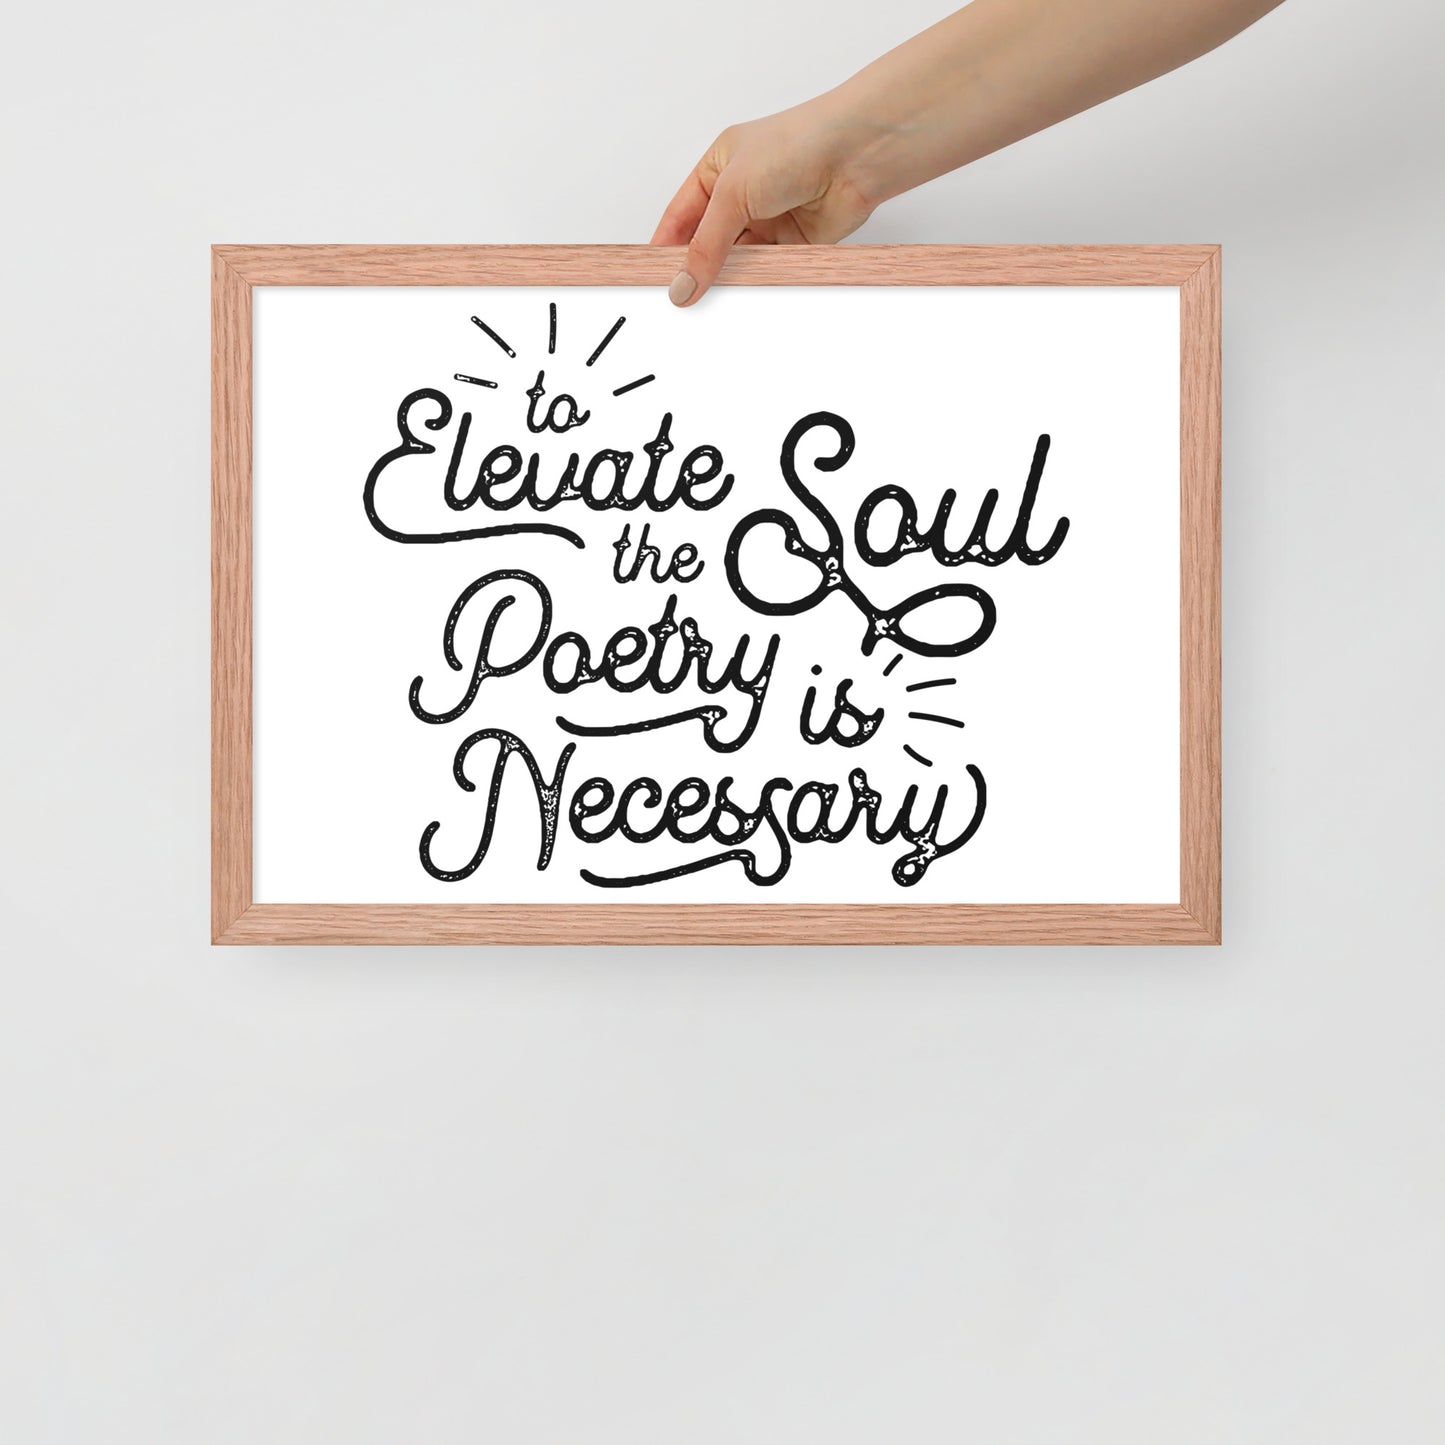 To Elevate the Soul Poetry is Necessary Framed Poster - 12 x 18 Red Oak Frame